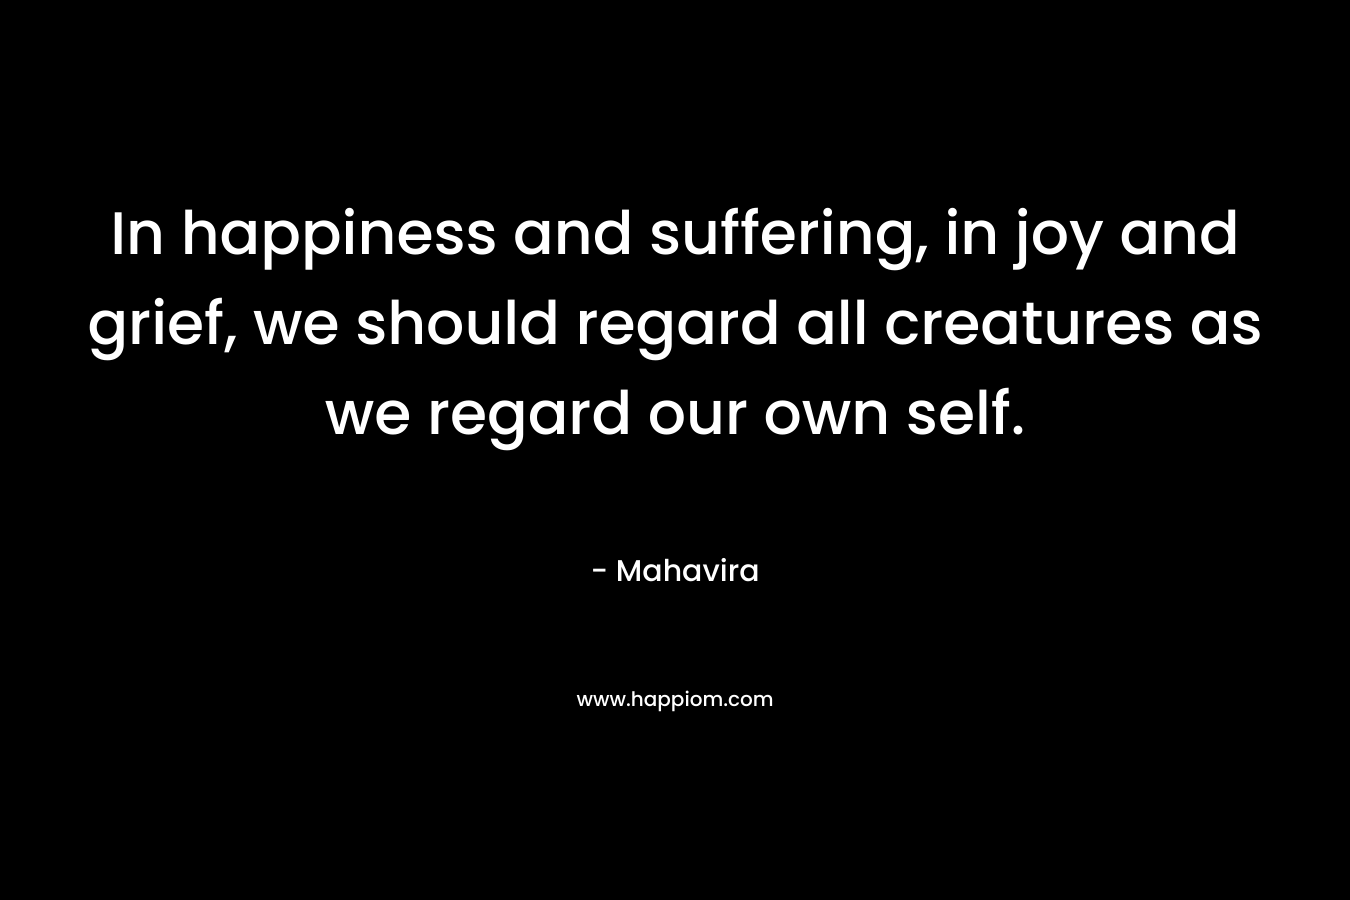 In happiness and suffering, in joy and grief, we should regard all creatures as we regard our own self. – Mahavira